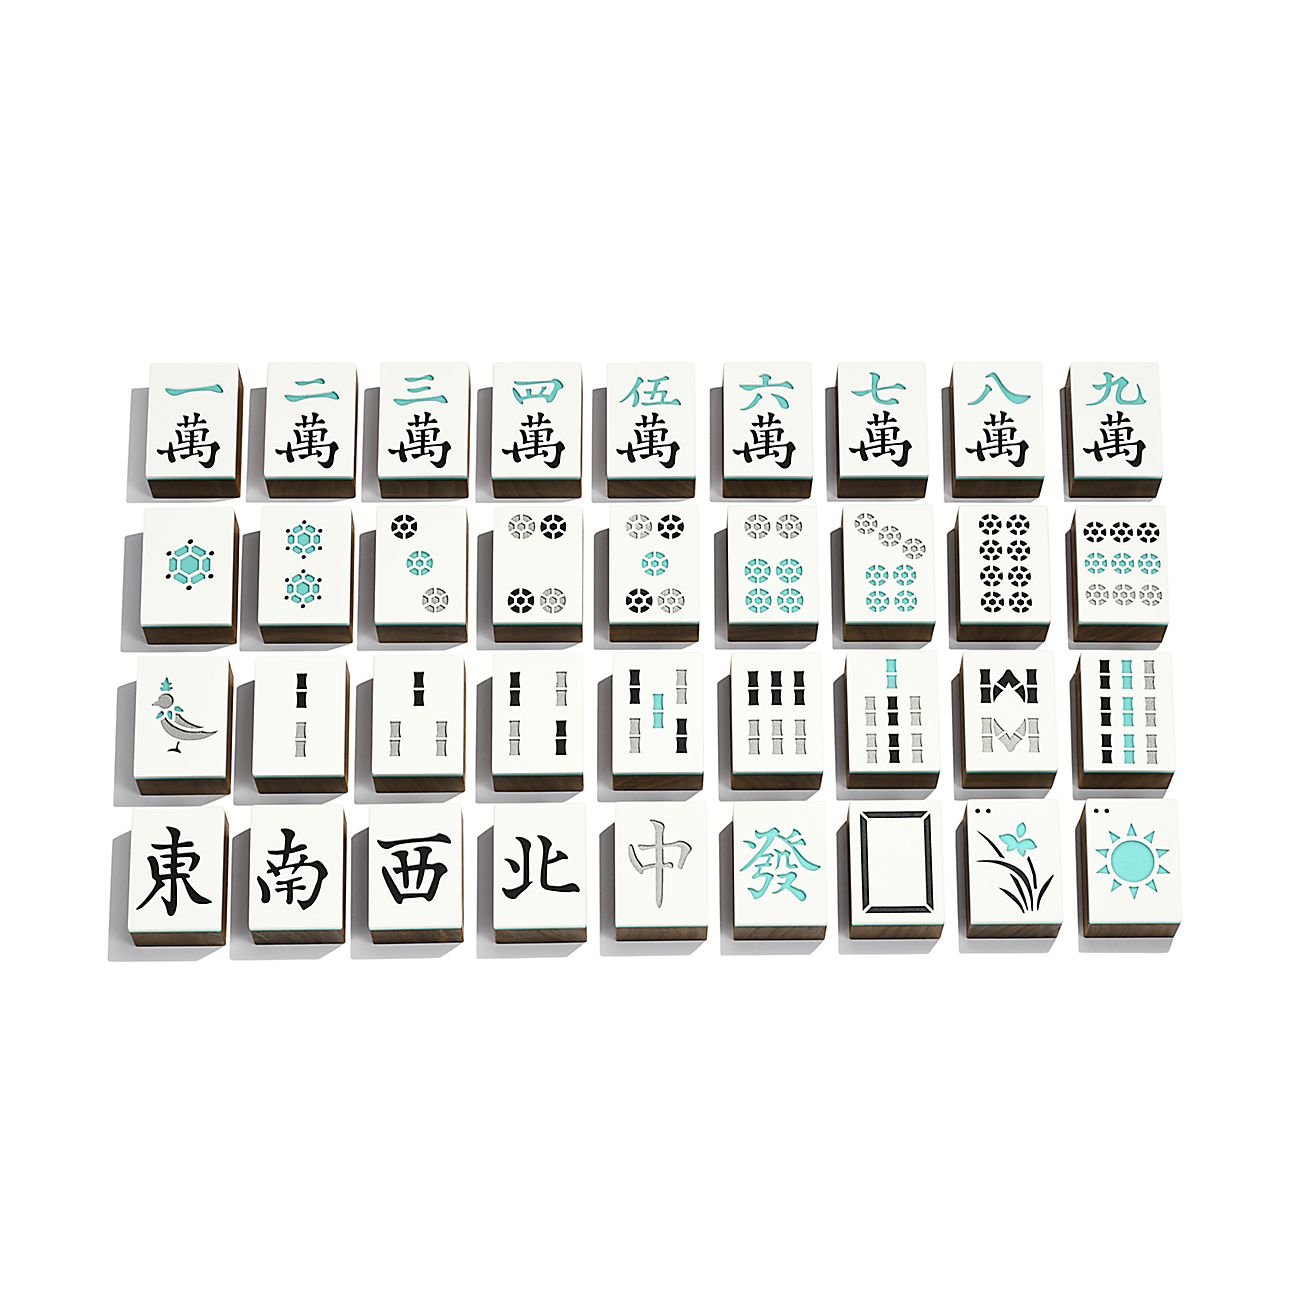 Tiffany & Co. releases luxurious mahjong set. It'll cost you US